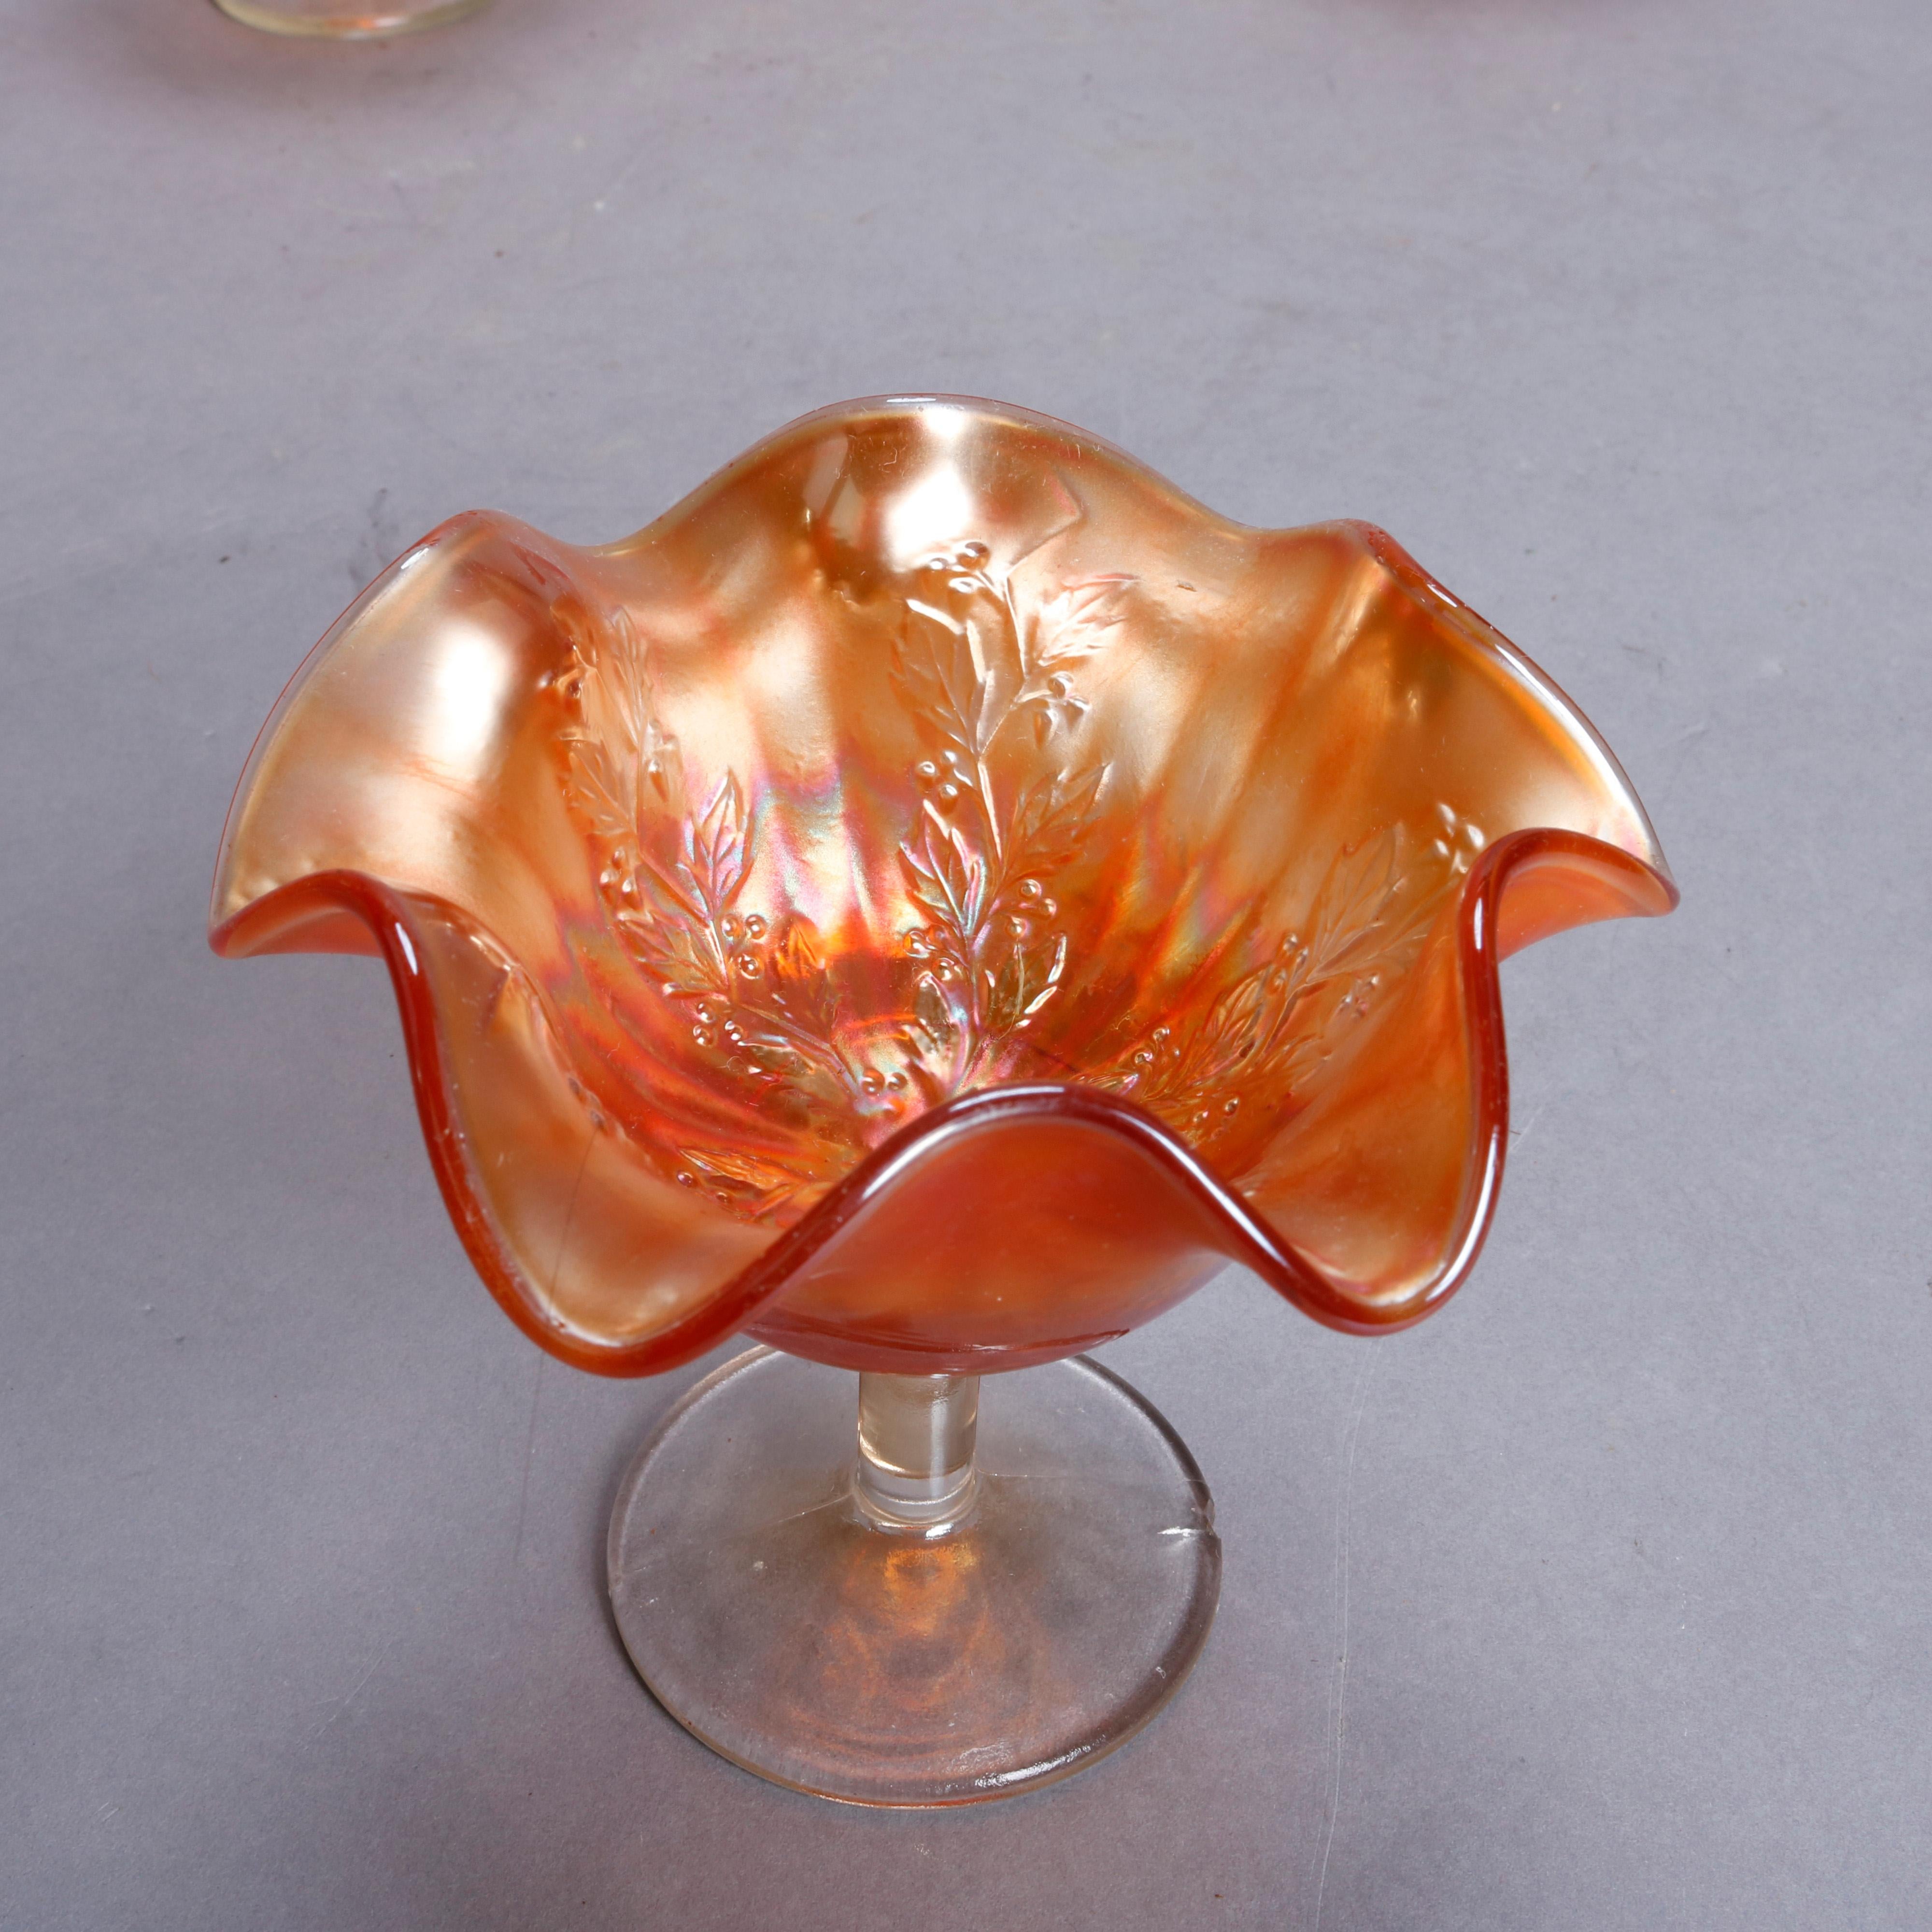 A set of four antique ice cream dessert cups by Fenton offer flared marigold carnival glass in Holly Berry pattern with bowls having ruffled rims and embossed design, raised on clear footed stems, circa 1930

Measures - 4.25